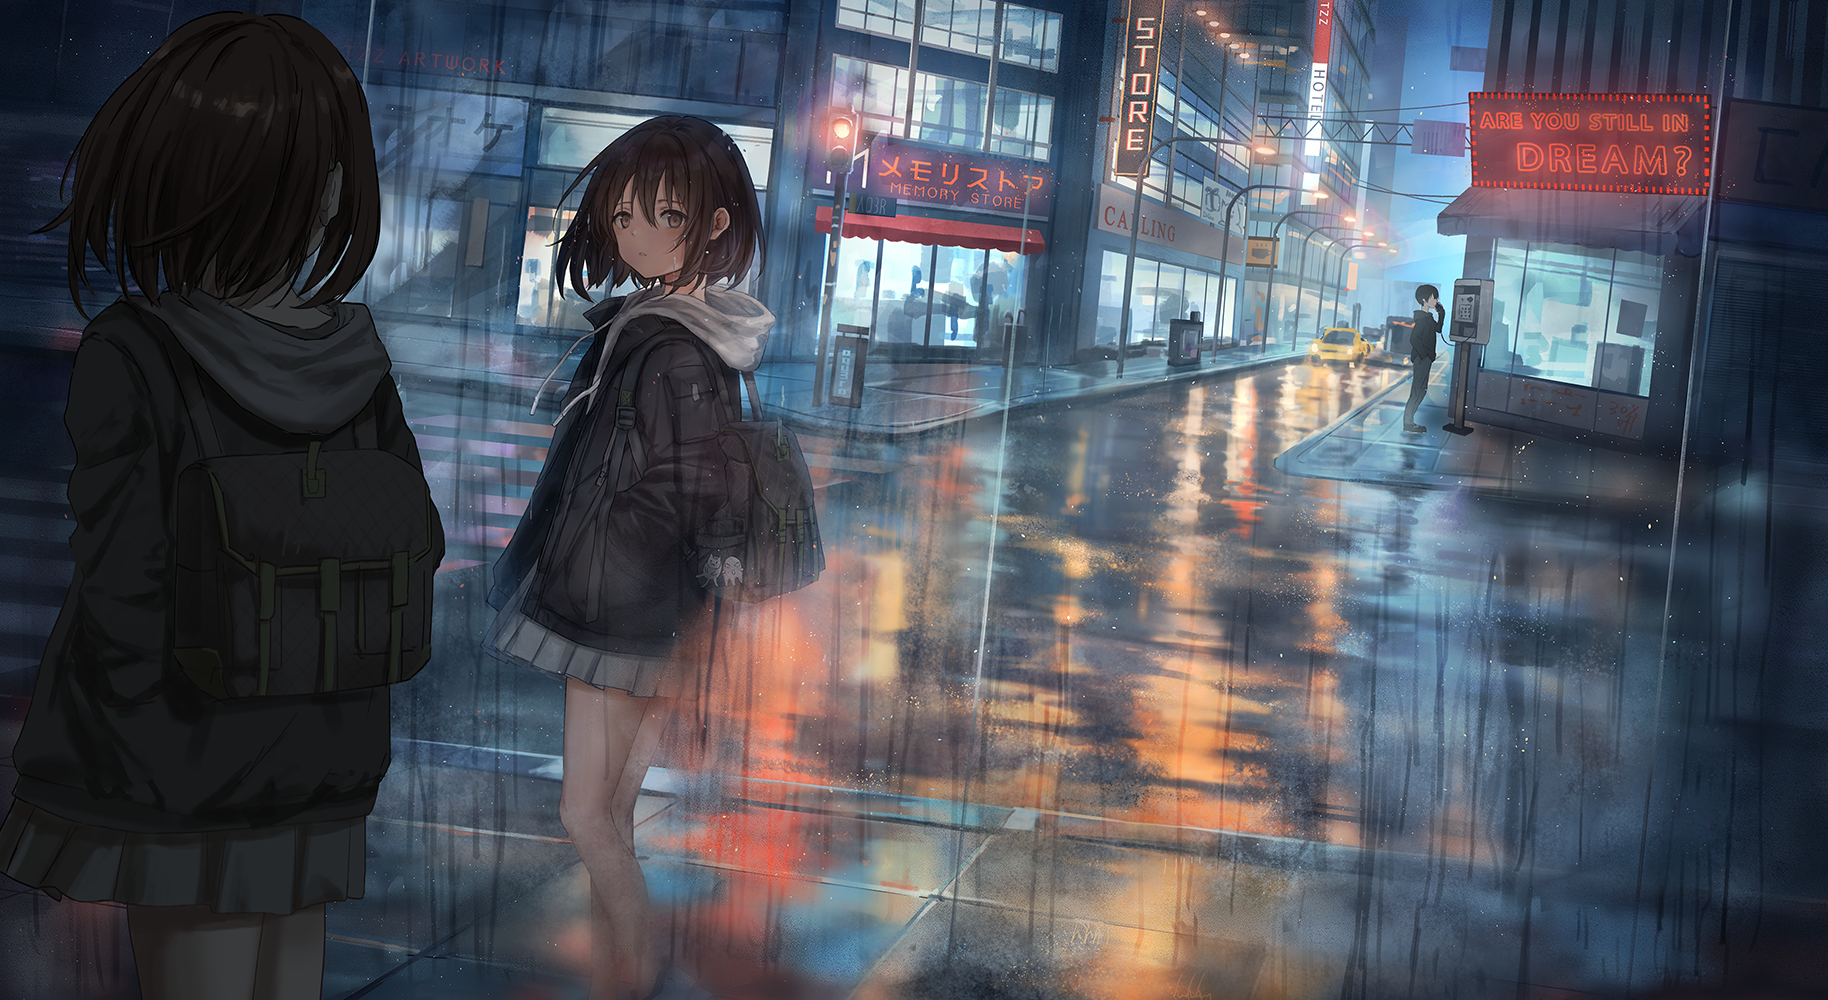 How to Draw an Anime Girl in the Rain - Easy Step by Step Tutorial